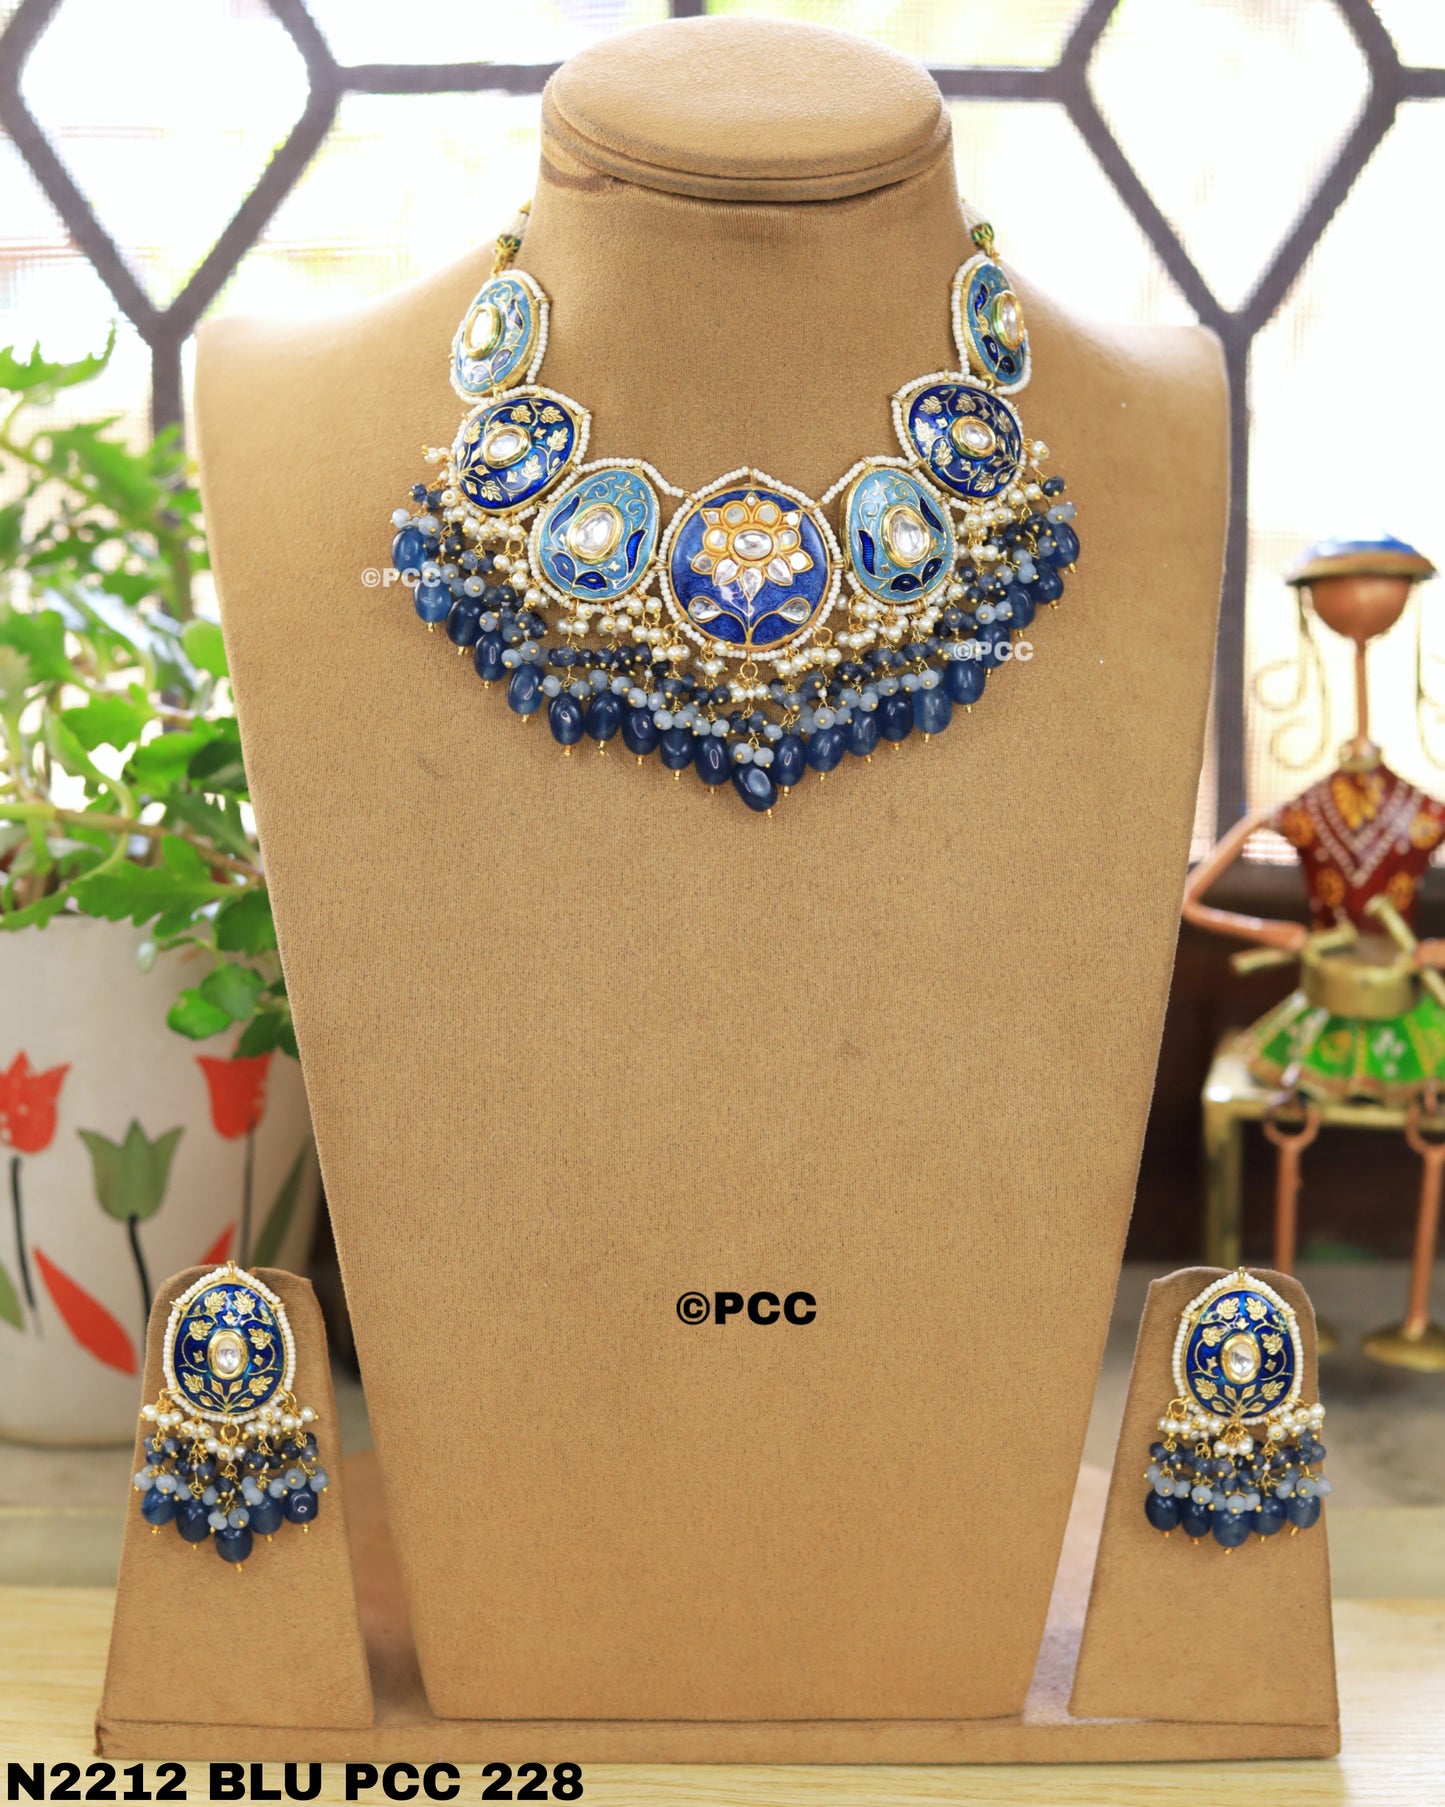 Beautiful Necklace & a pair of earrings